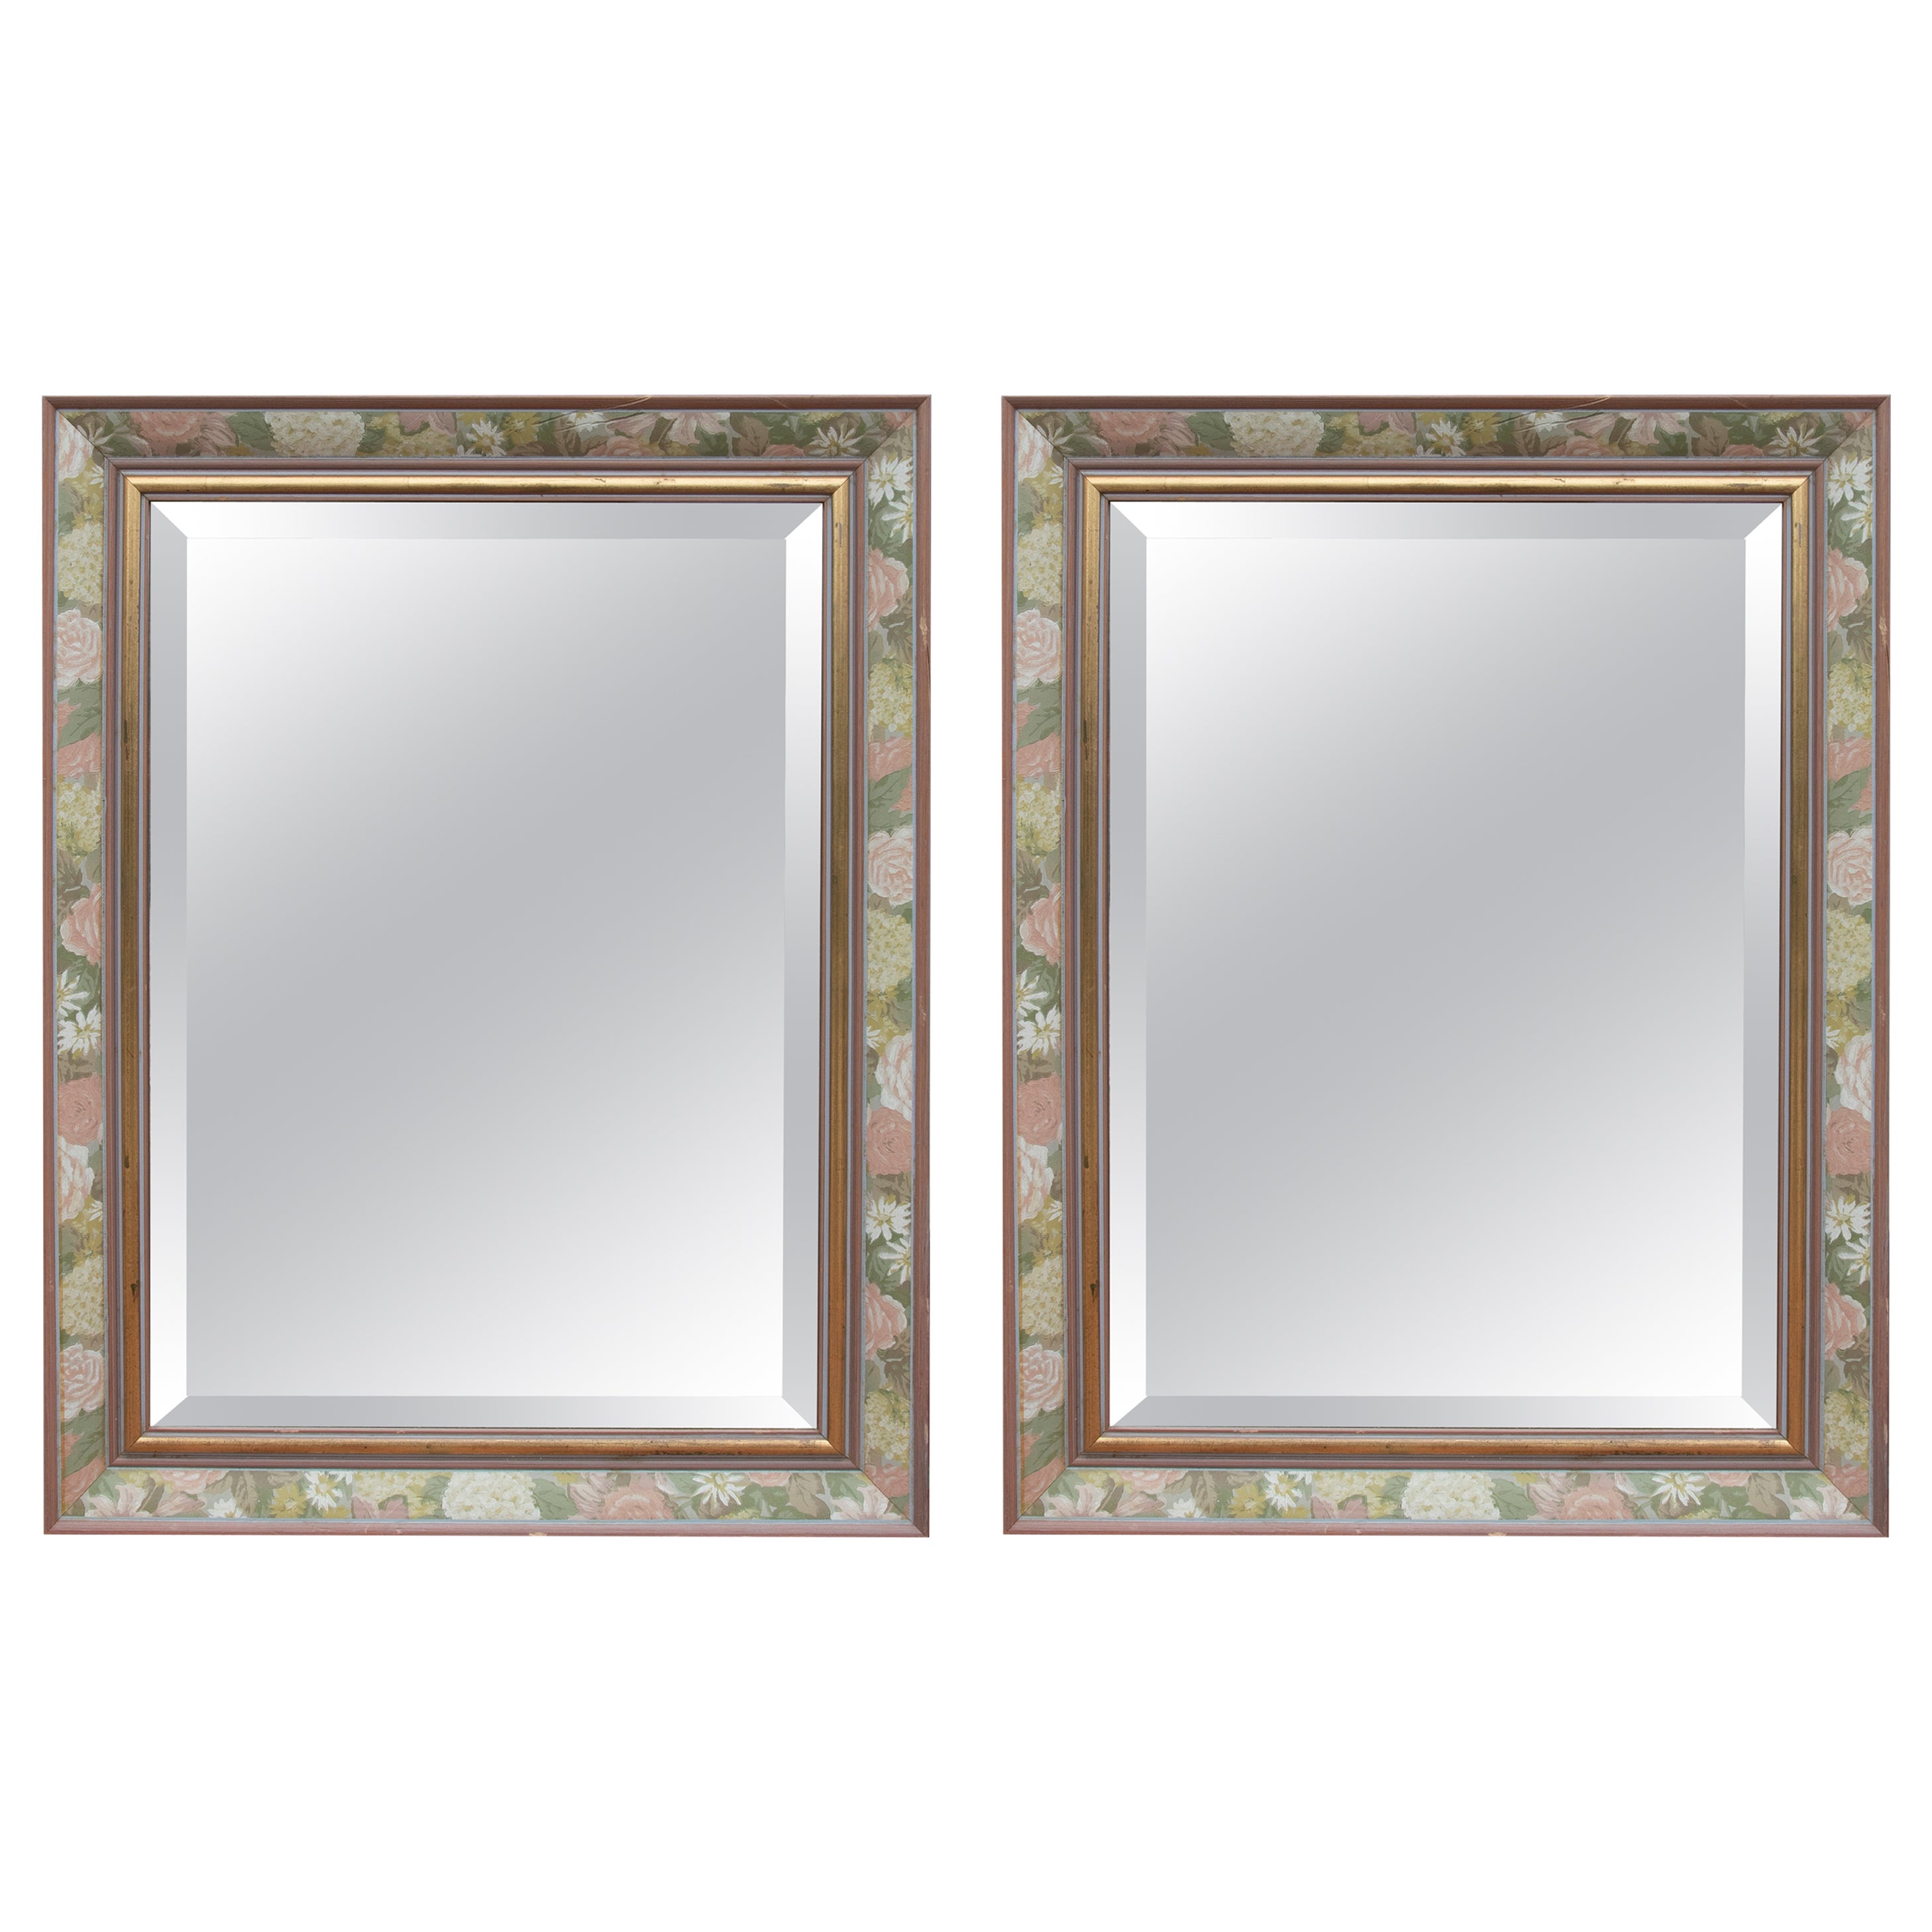 Pair of Polychrome Wooden Mirrors with Flower Scenes  For Sale